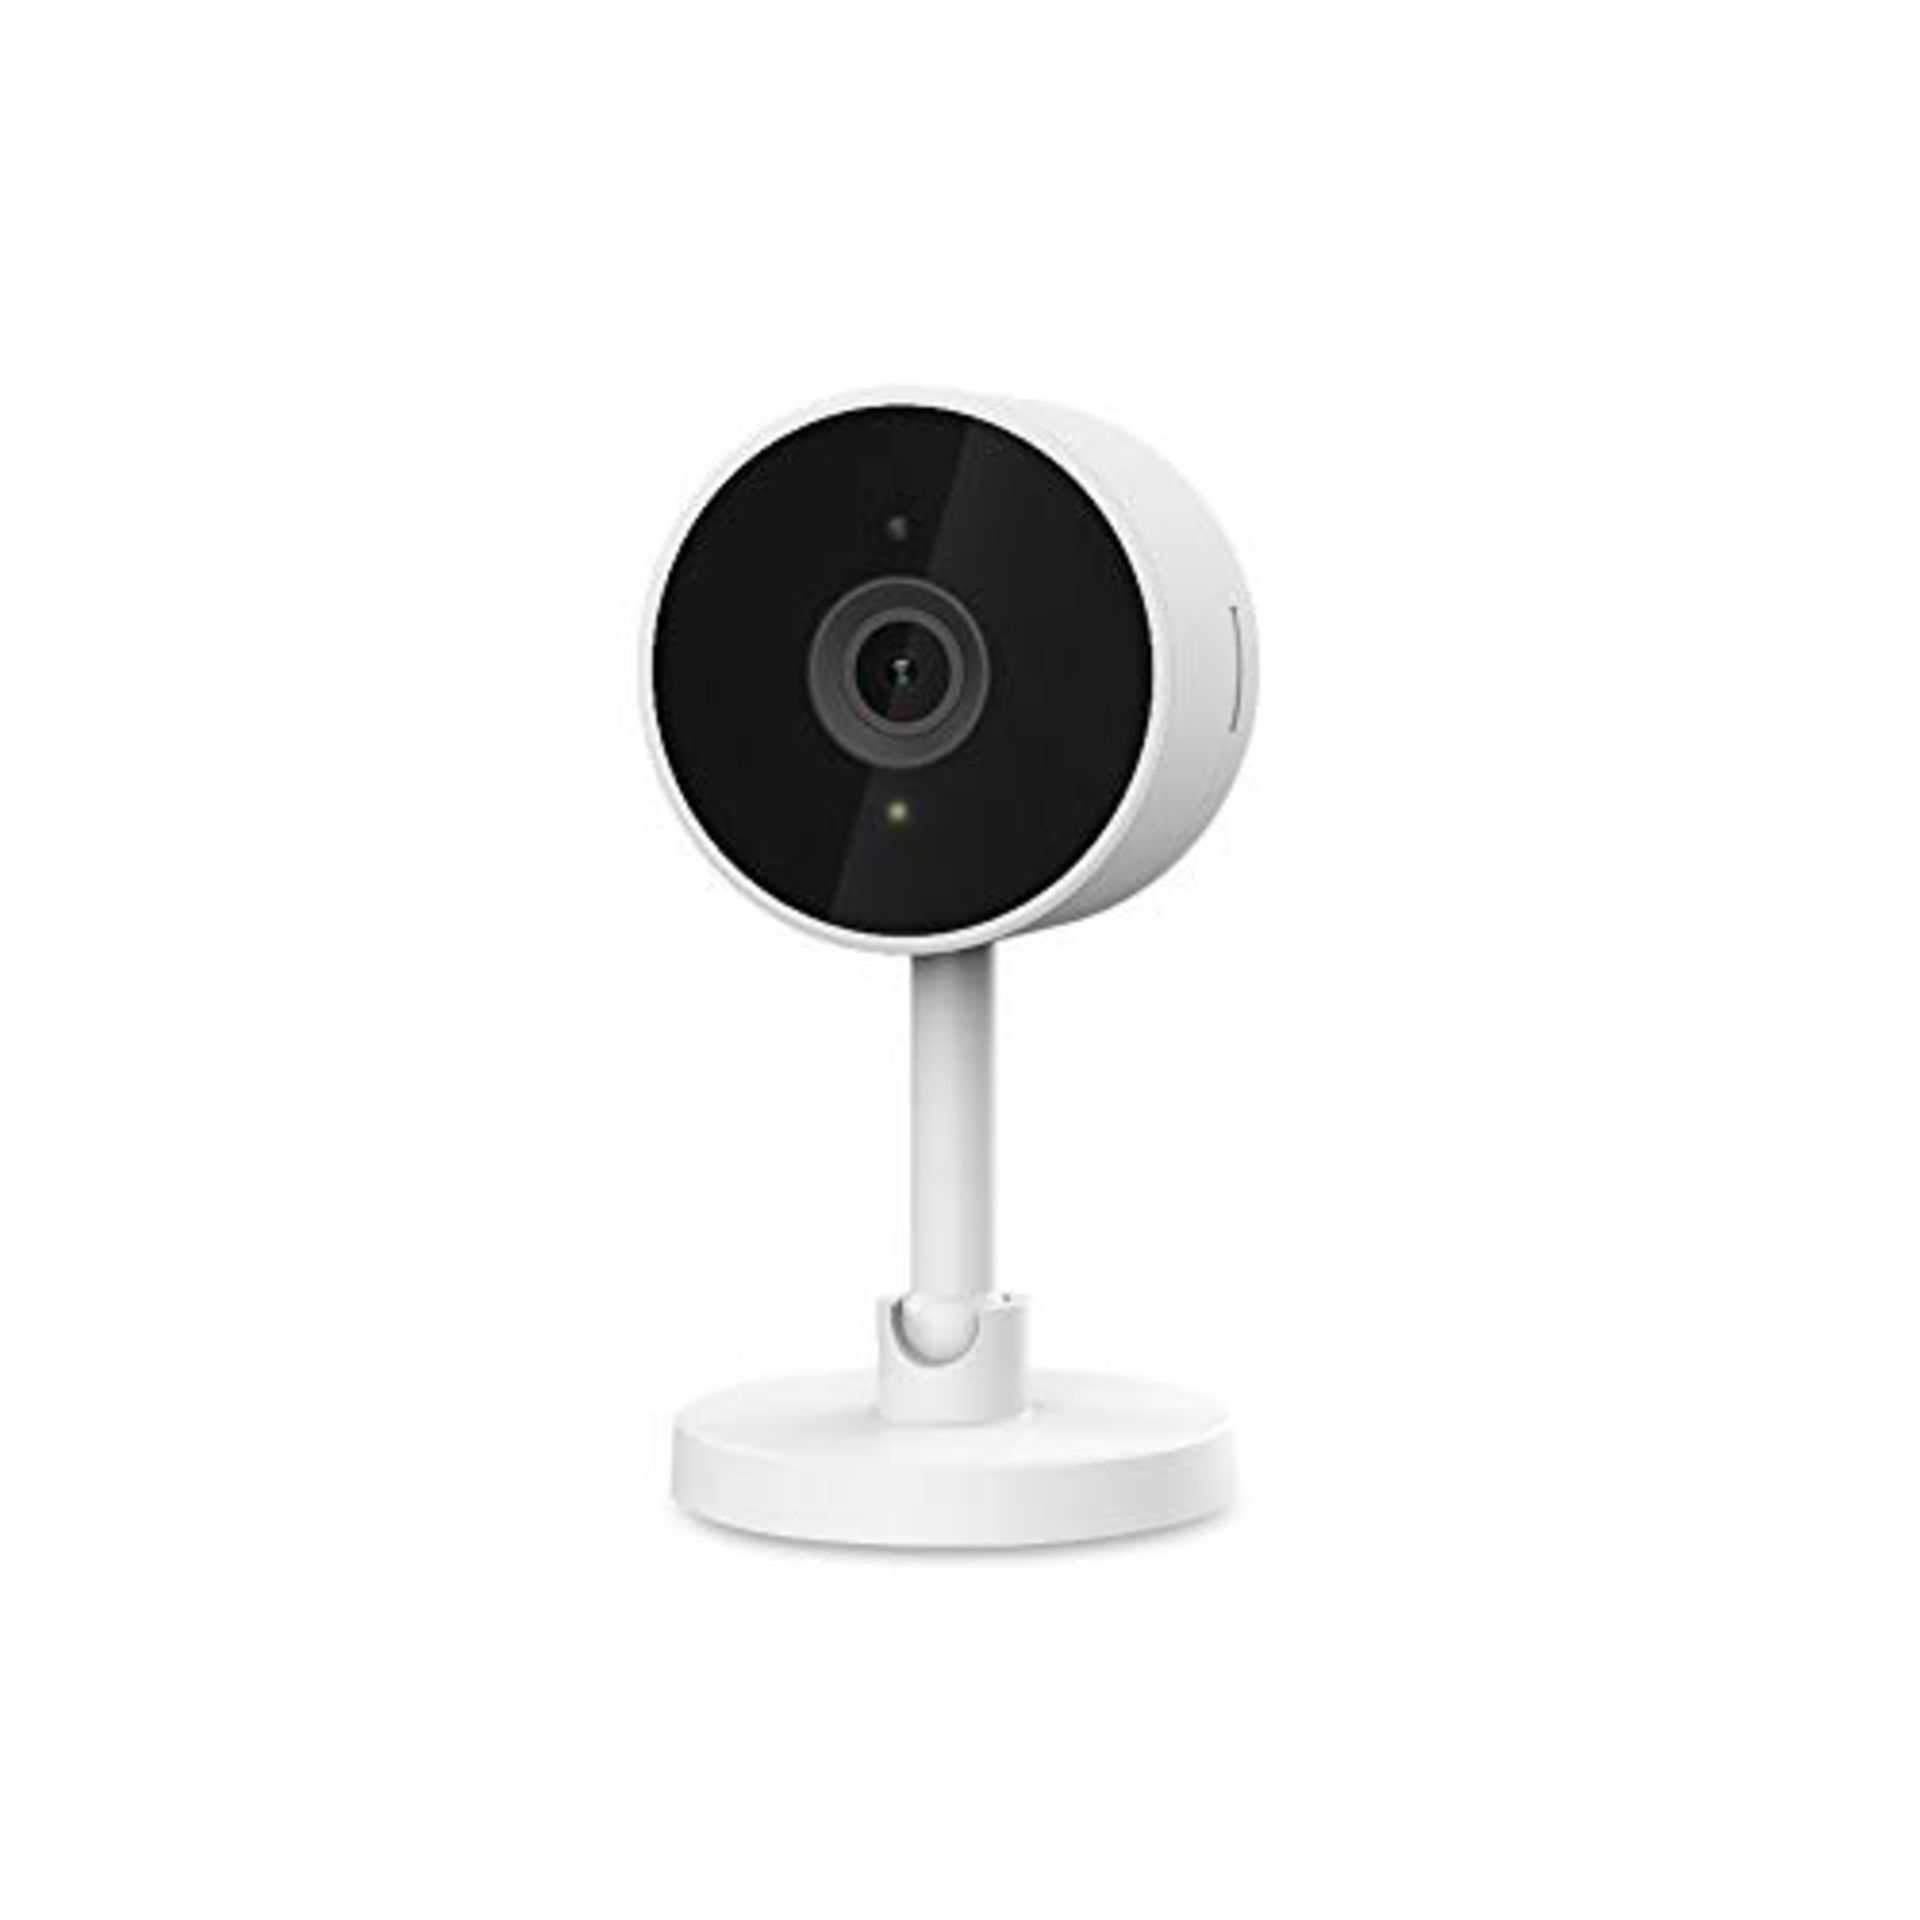 Woox Smart Camera 1080P Wifi IP Security Camera with Night Vision Motion Detection 2-W - Image 2 of 2